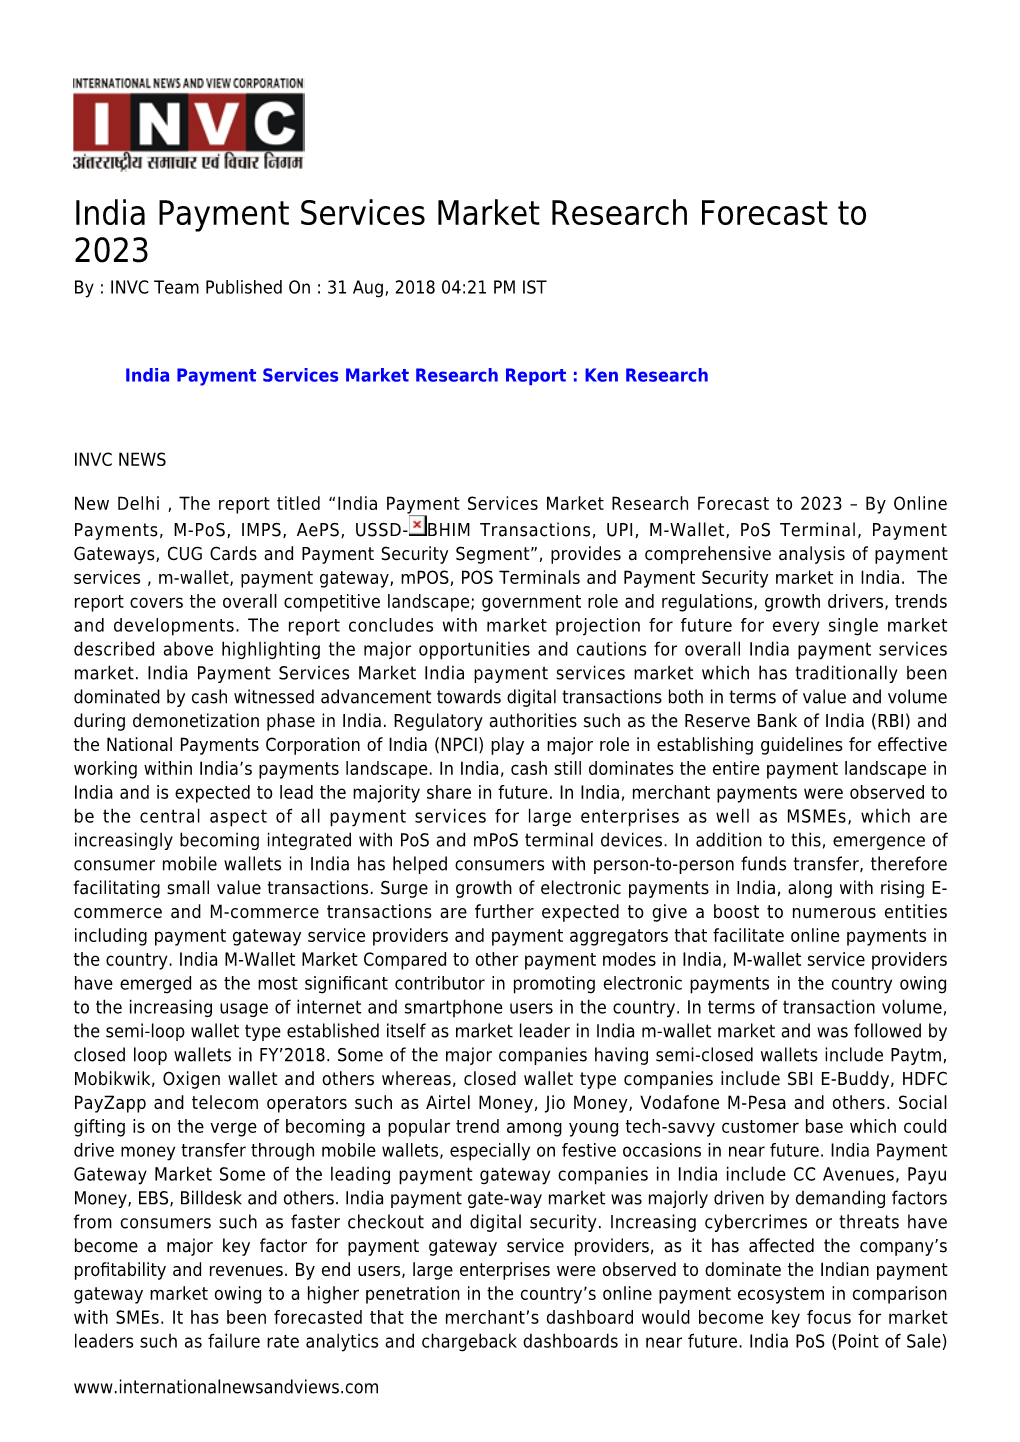 India Payment Services Market Research Forecast to 2023 by : INVC Team Published on : 31 Aug, 2018 04:21 PM IST